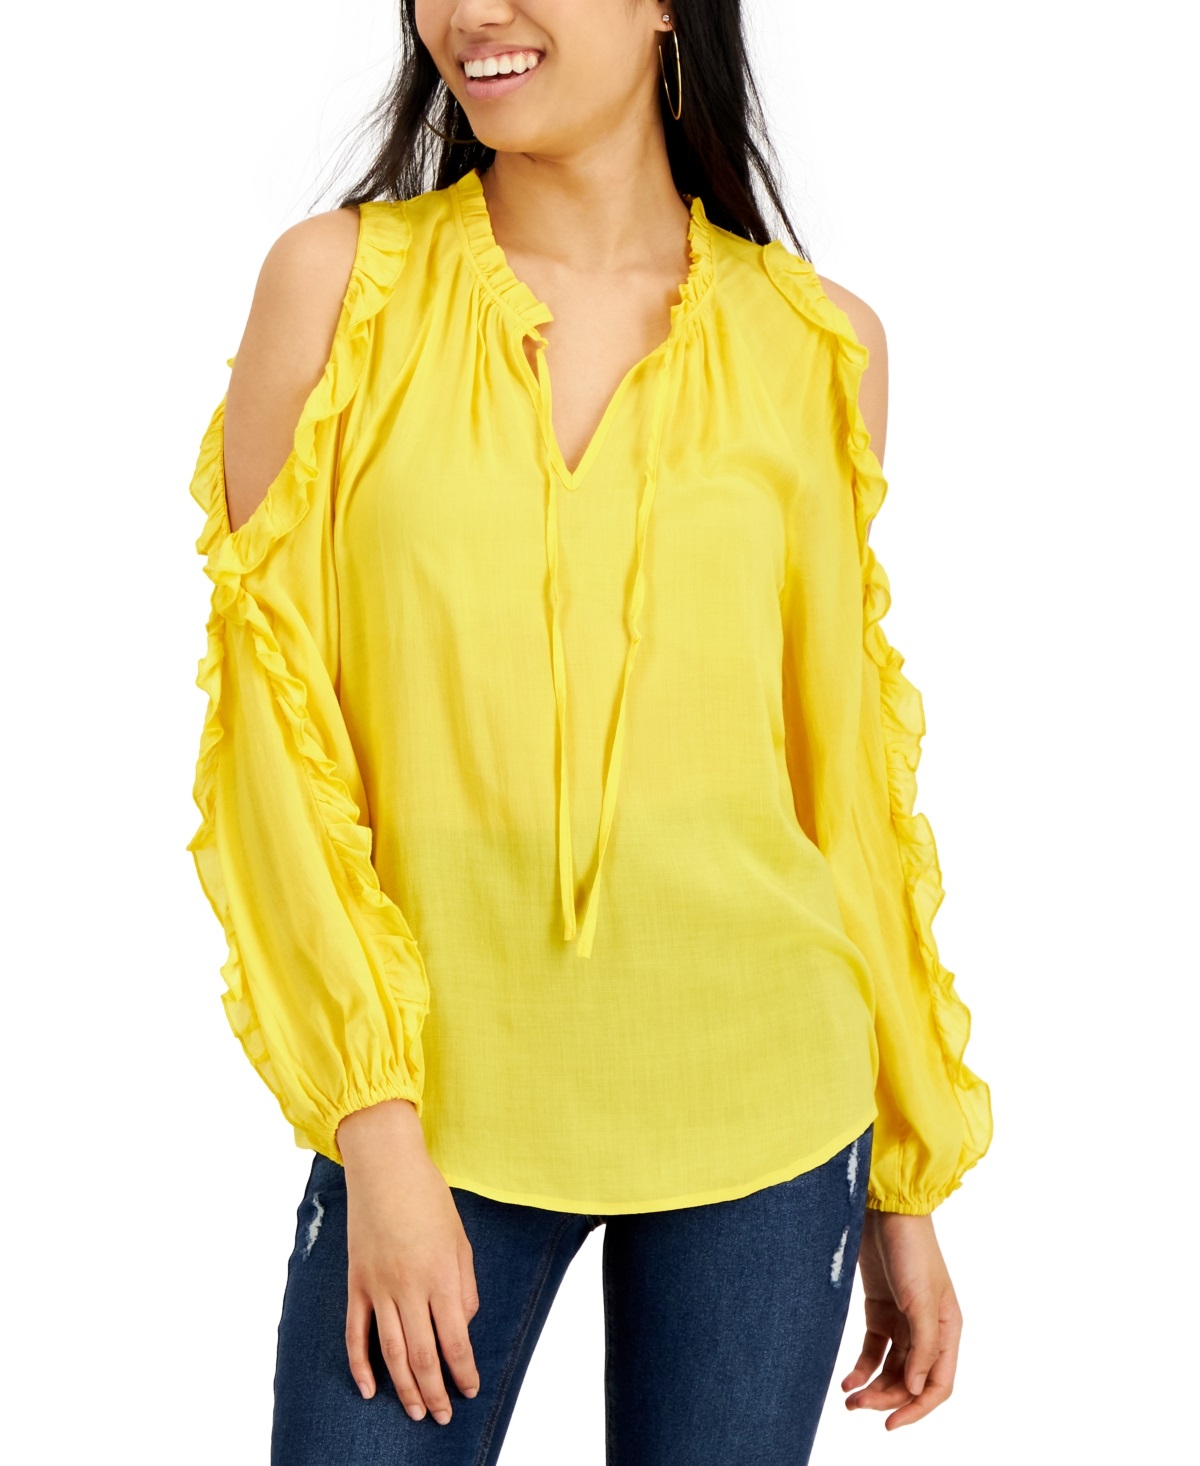 Willow Drive Women's Ruffled Cold Shoulder Top Yellow Size Large